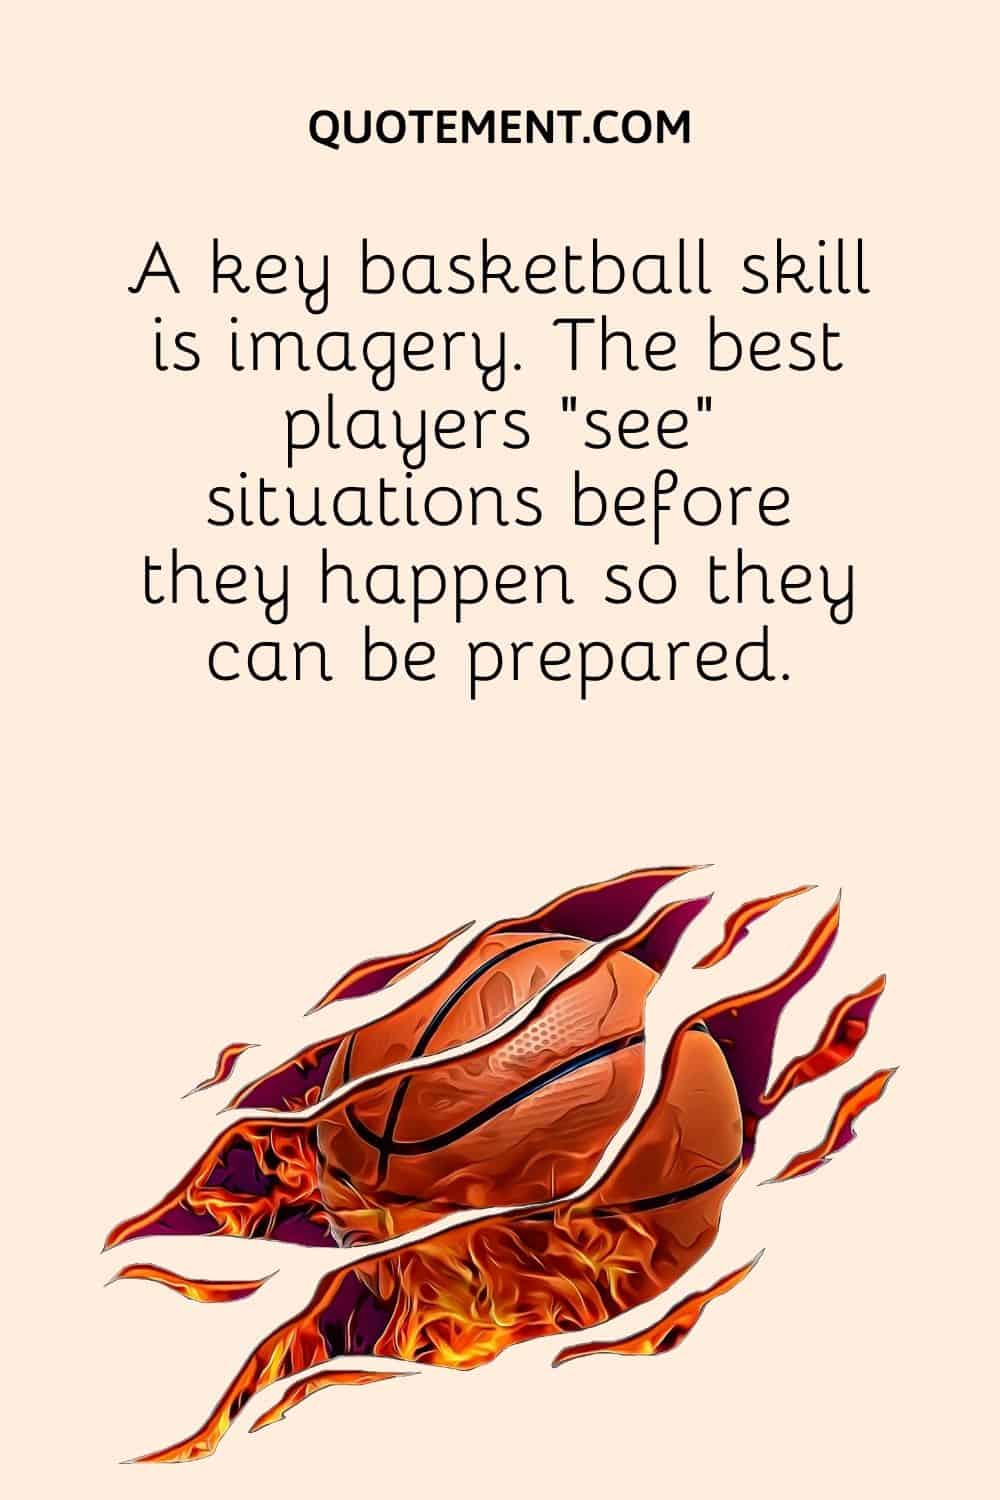 A key basketball skill is imagery